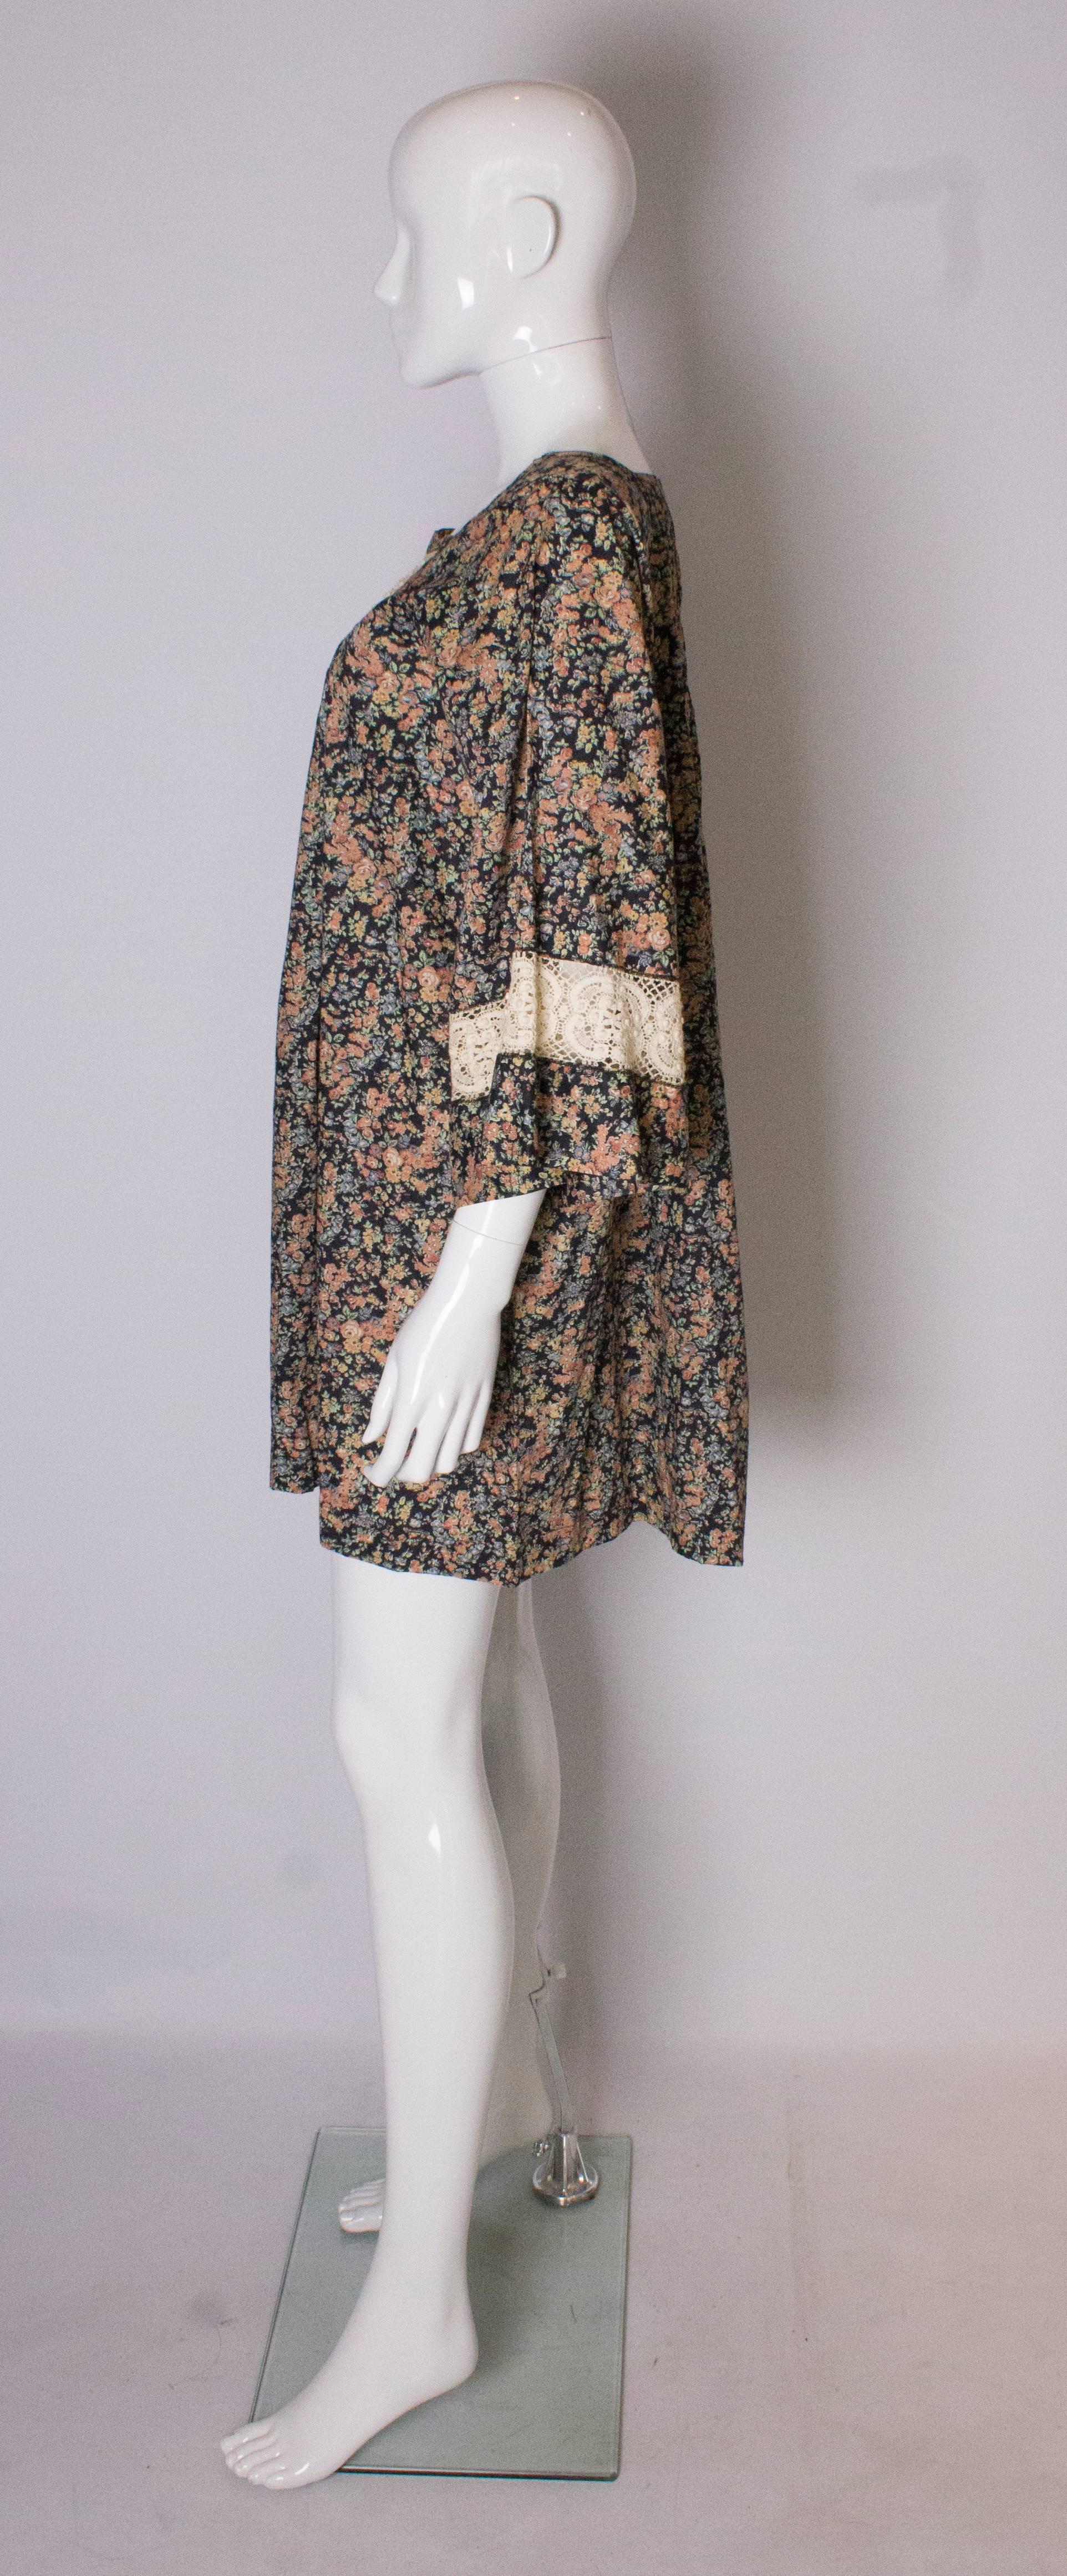 A Vintage 1970s Liberty / Sara Ferni Floral Print Top In Good Condition For Sale In London, GB